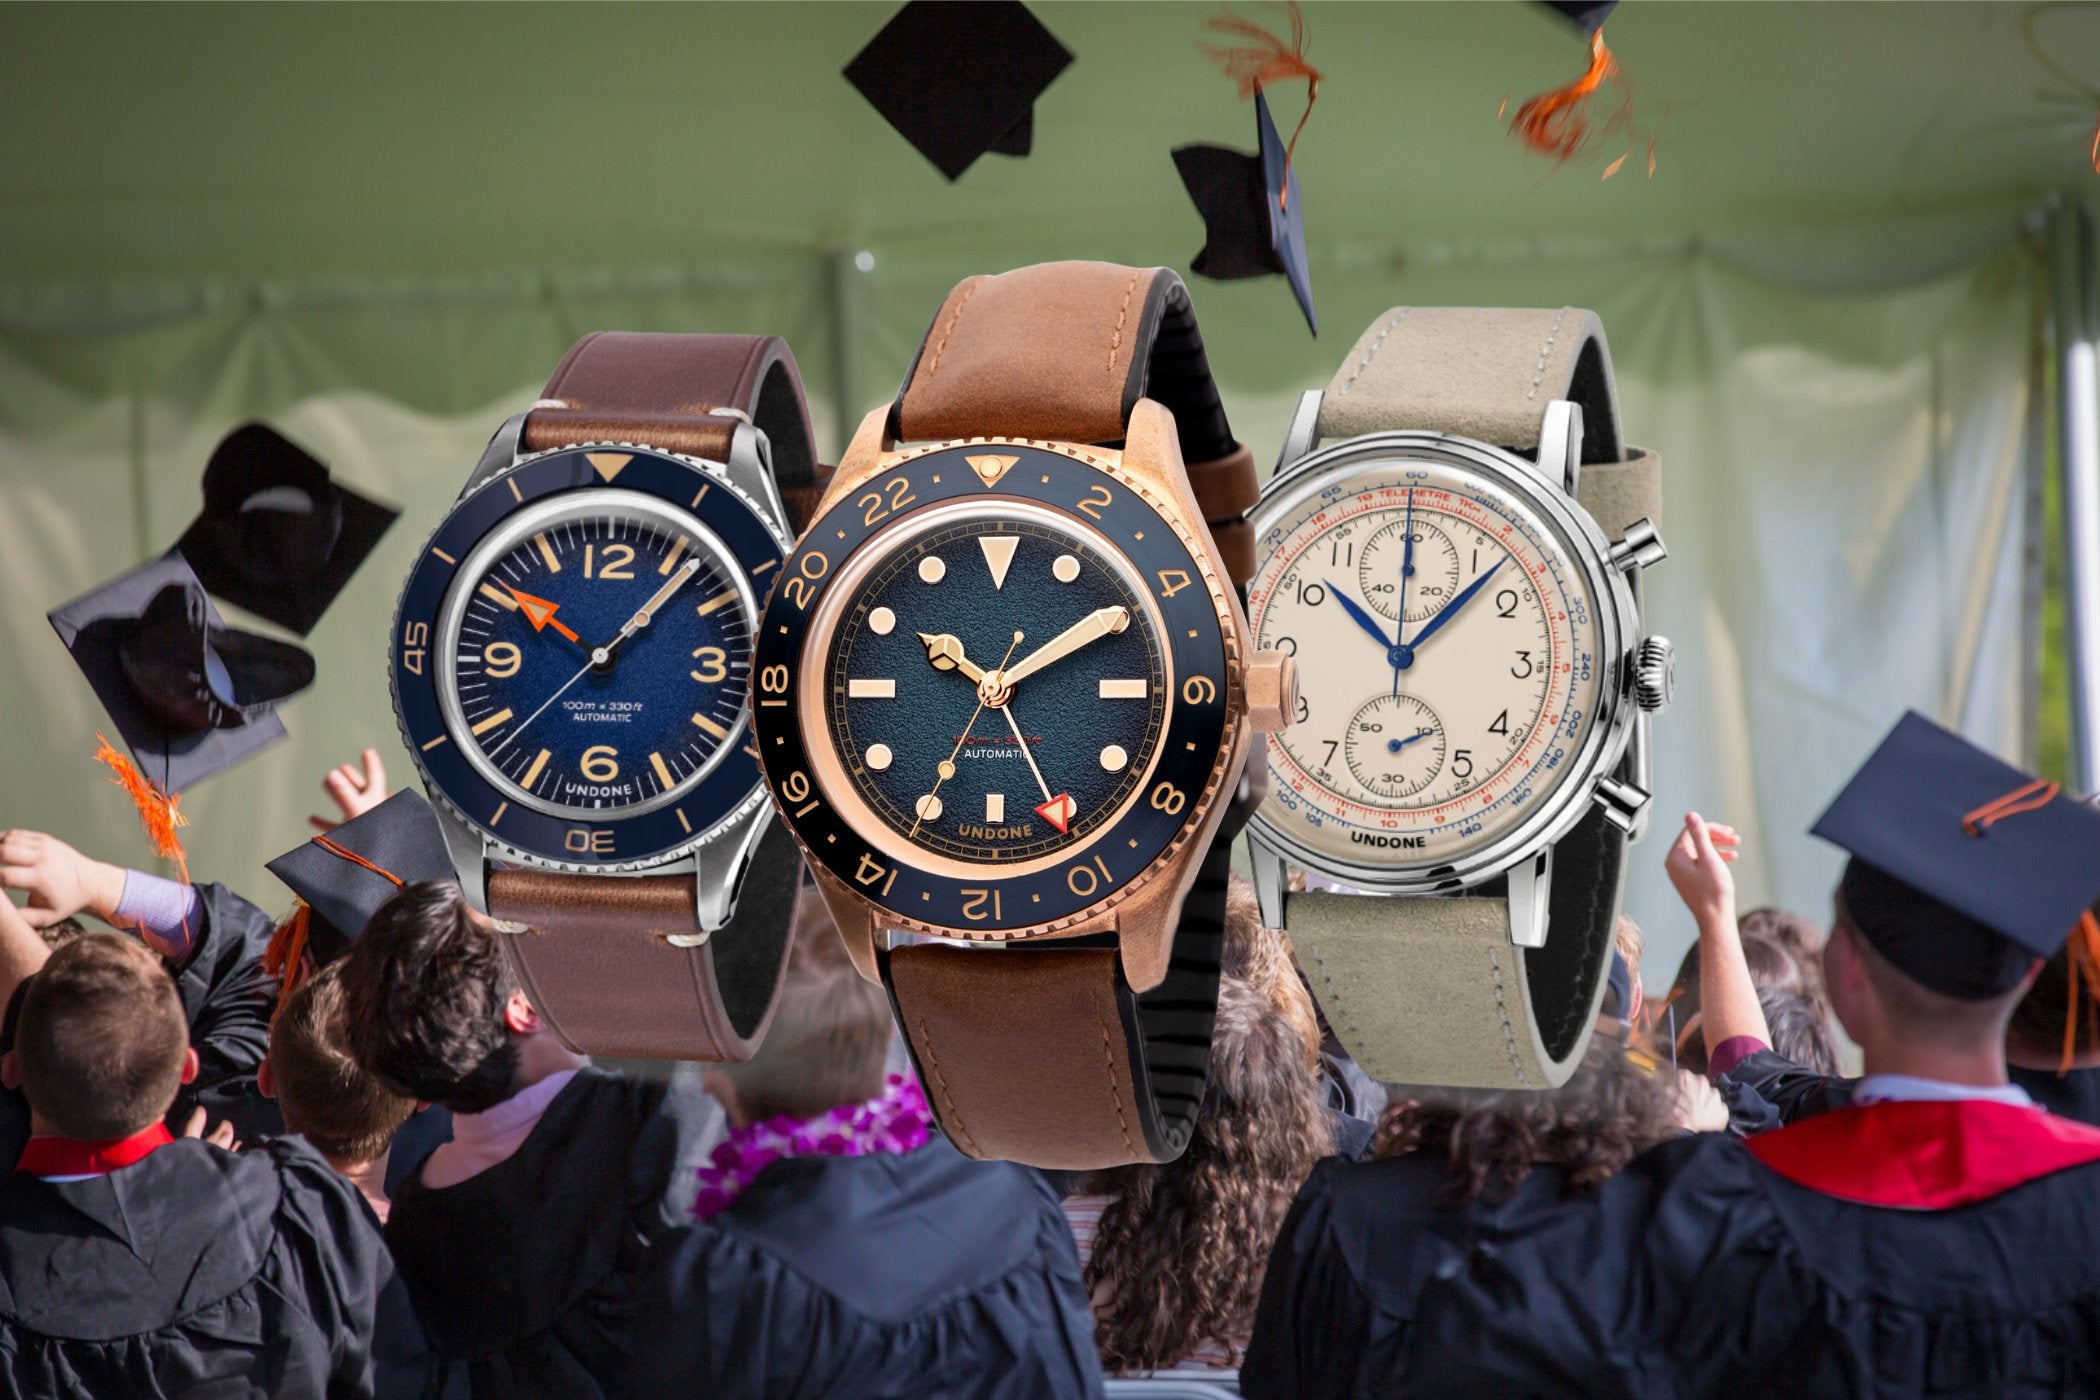 Passed your exams? Top 10 Graduation Gifts for Him and Her – The Watch Pages